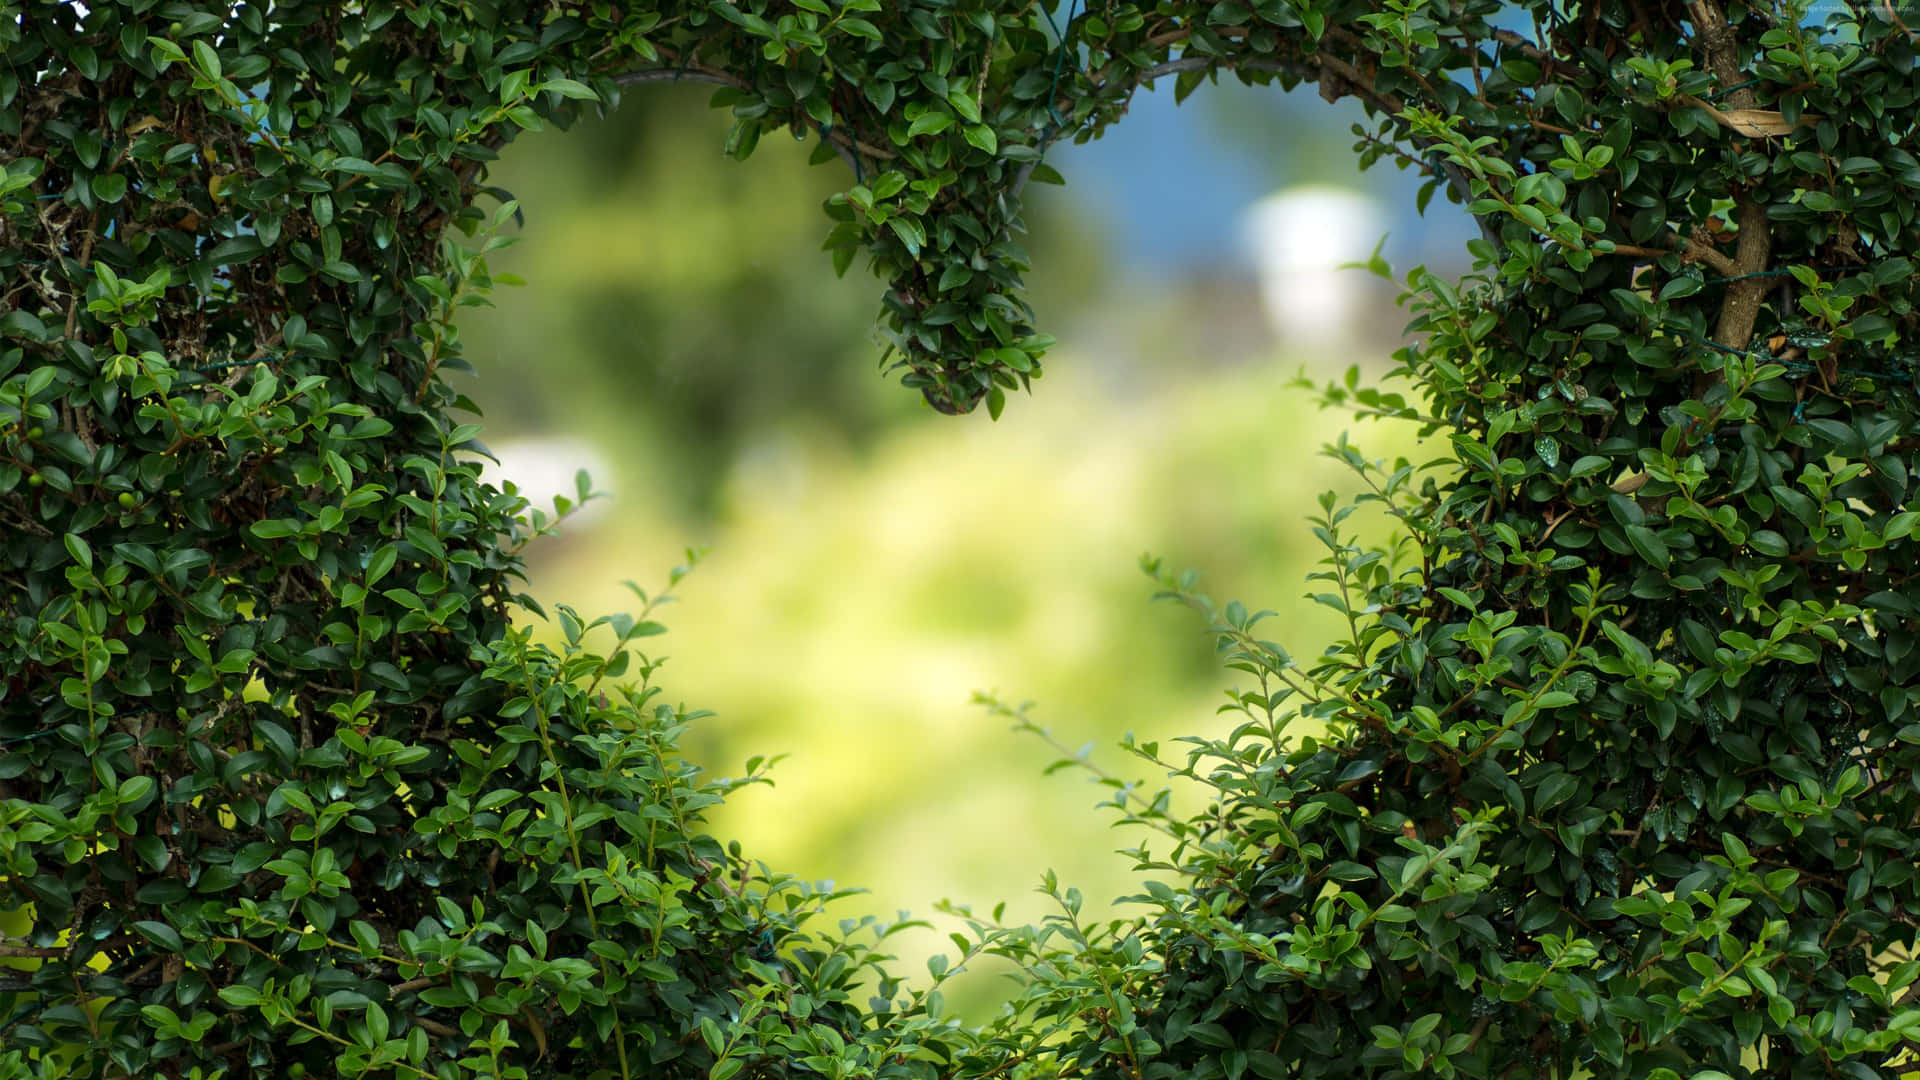 A Heart Shaped Hedge In The Middle Of A Green Field